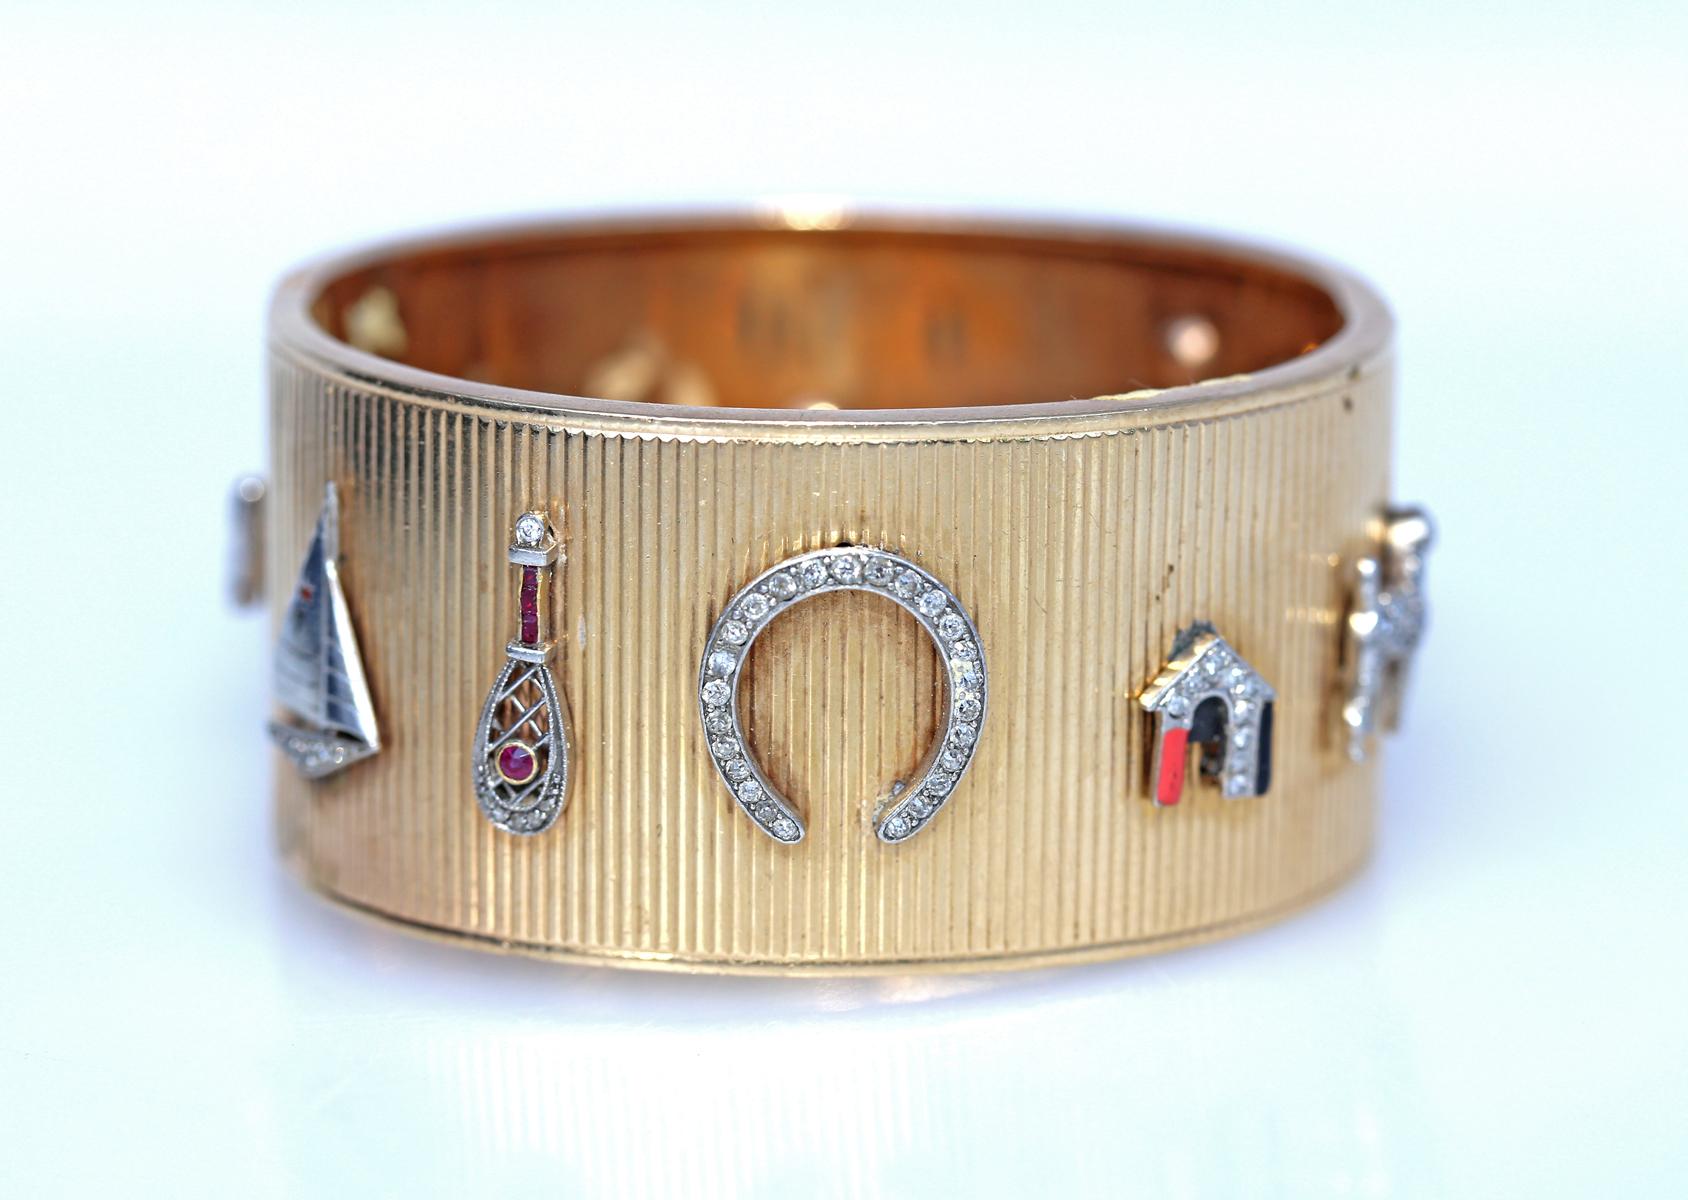 Retro Cuff Bracelet Enhanced by Applied Charms and Stickpins with Diamonds Sapphires in Yellow Gold. In my 40 years of collecting antiques, I have never come across an item that would be all about luck. The bracelet is a collection of everything